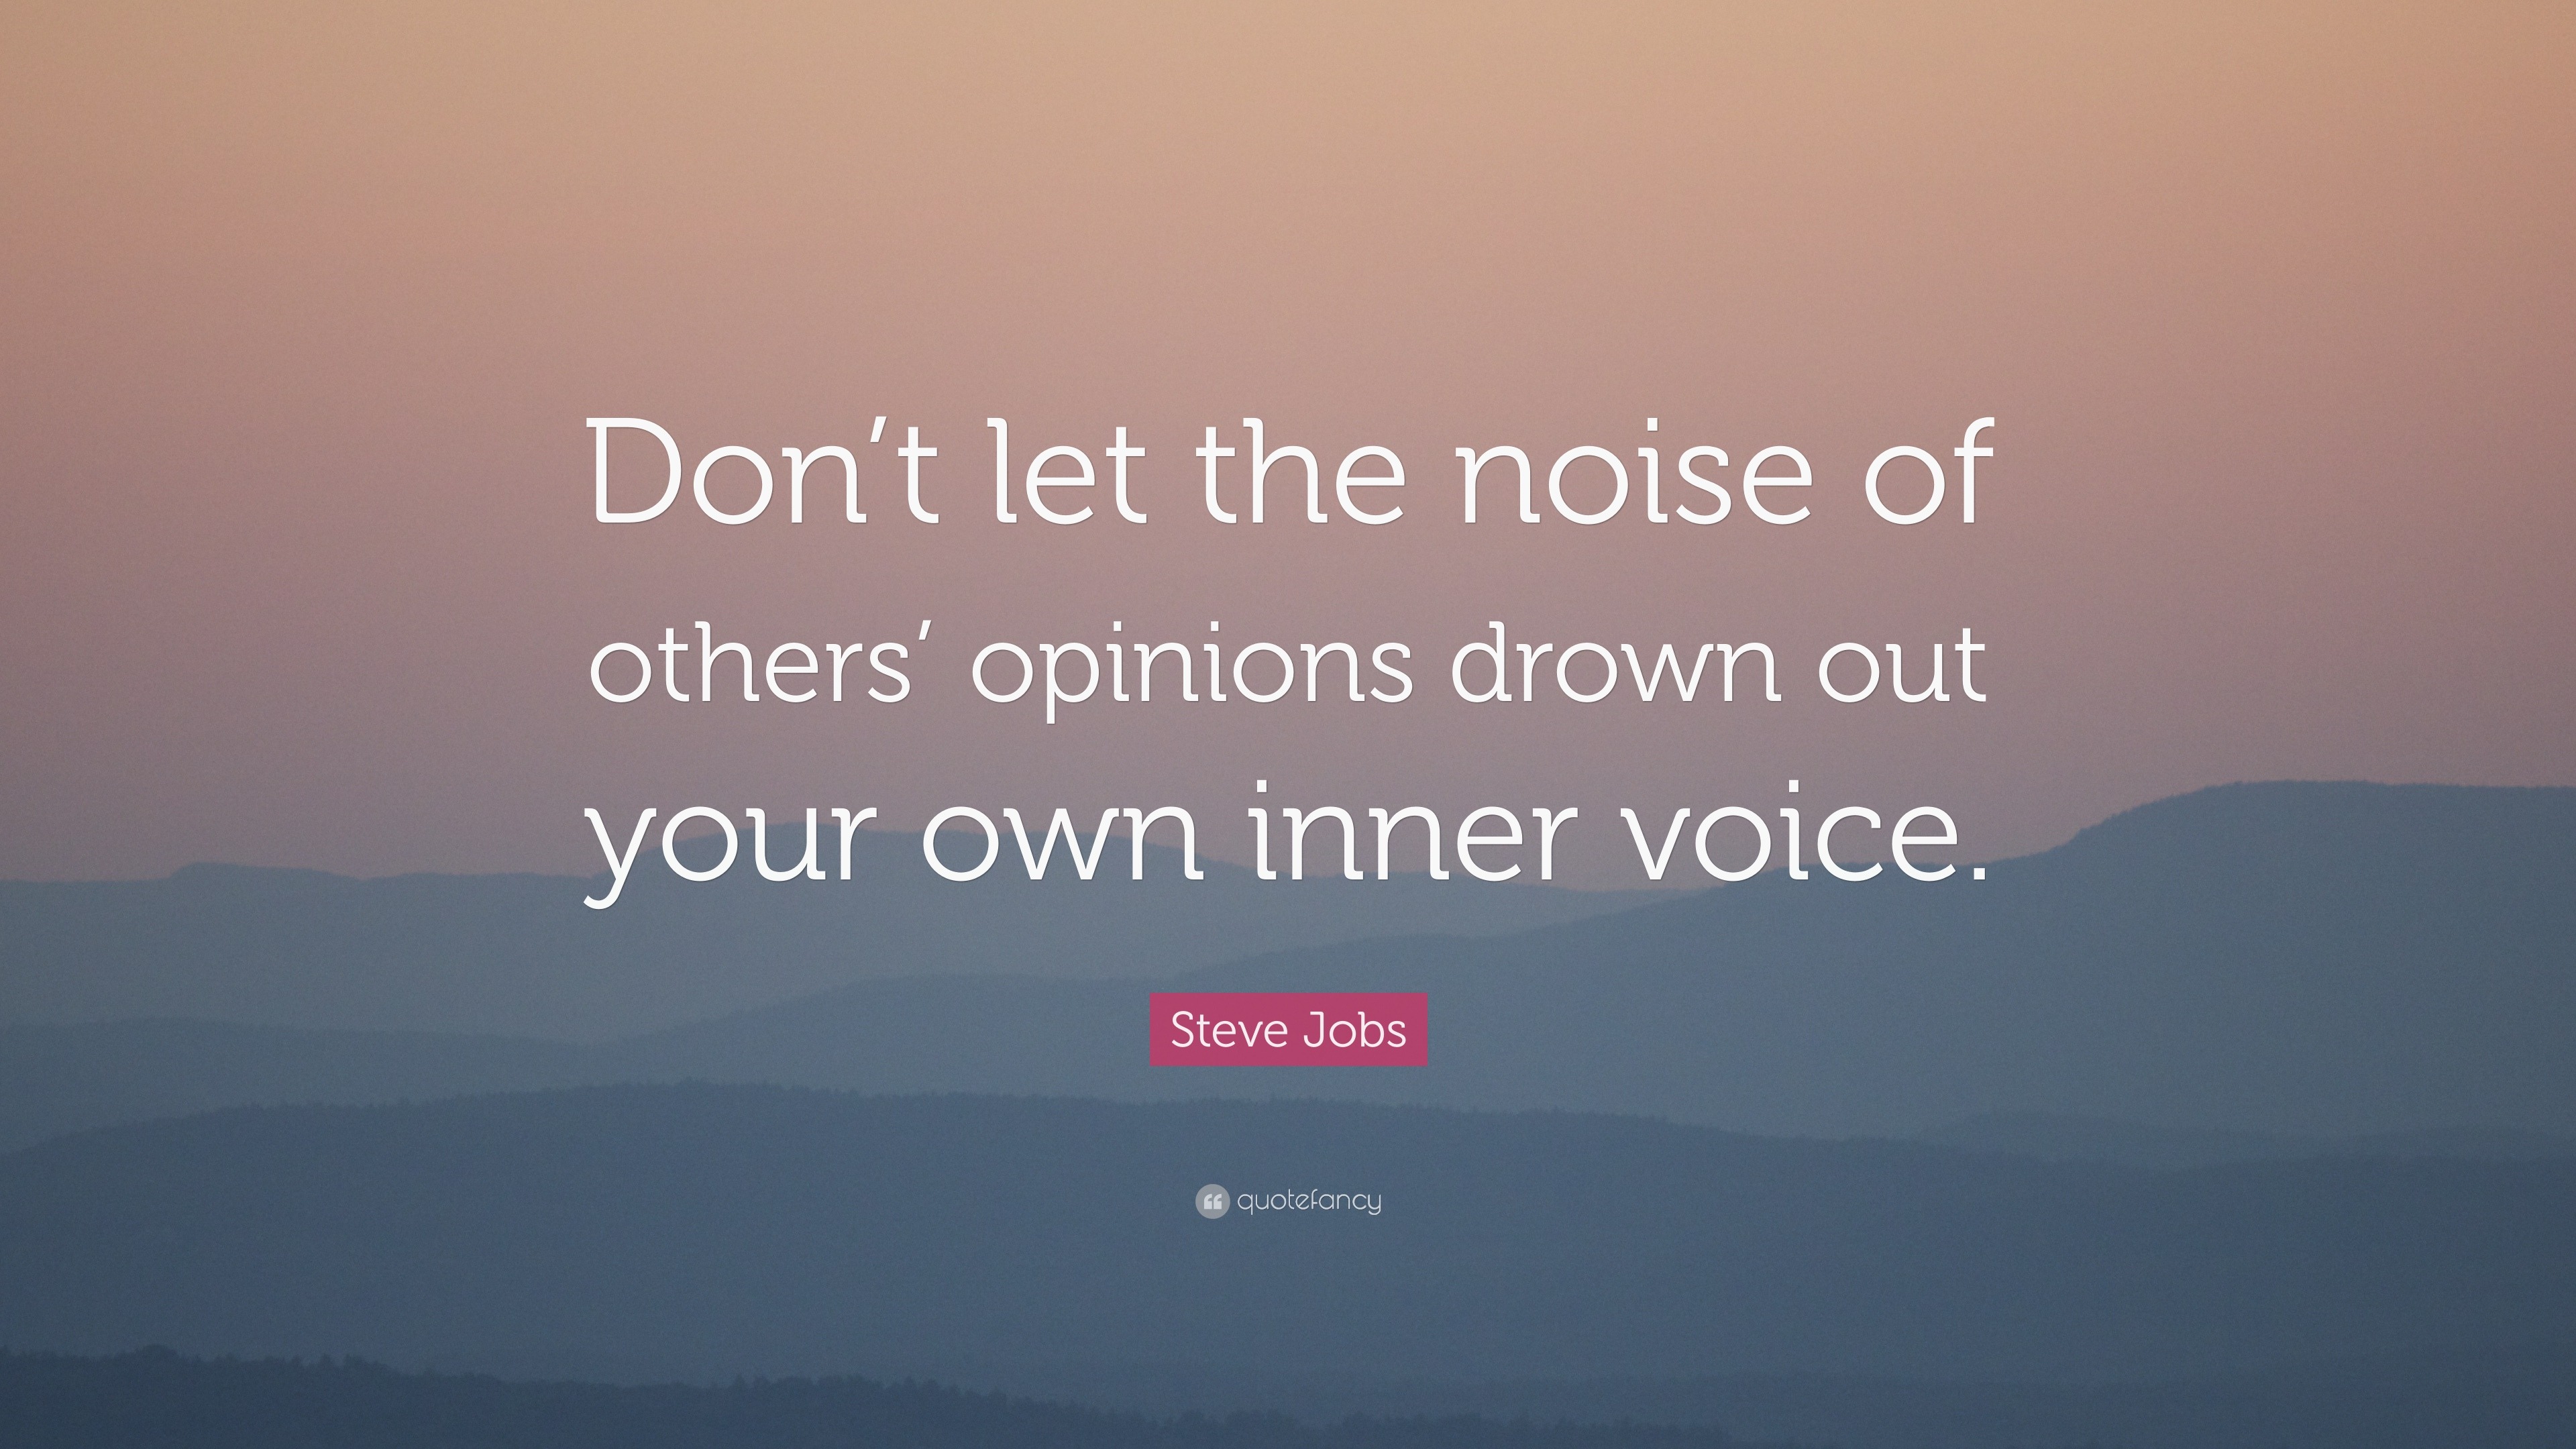 Steve Jobs Quote “Don t let the noise of others opinions